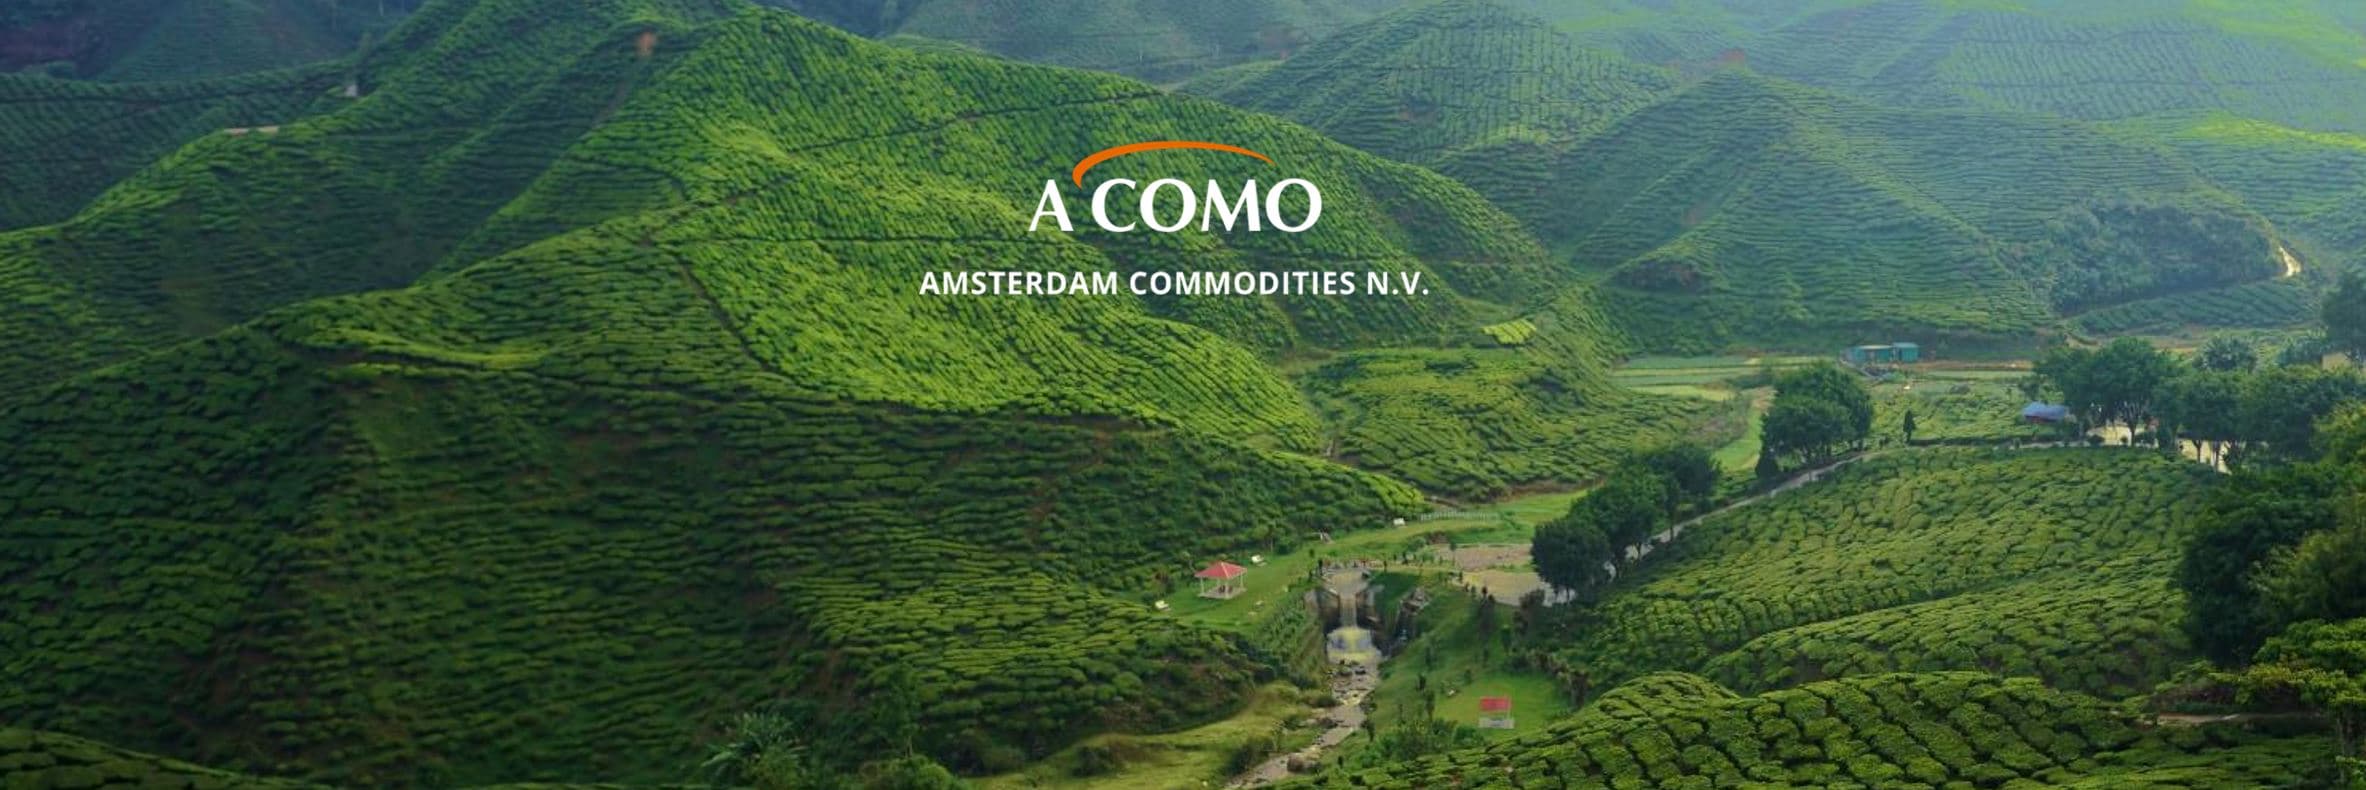 Acquisition of Tradin Organic Agriculture B.V. by Amsterdam Commodities N.V. (Acomo).